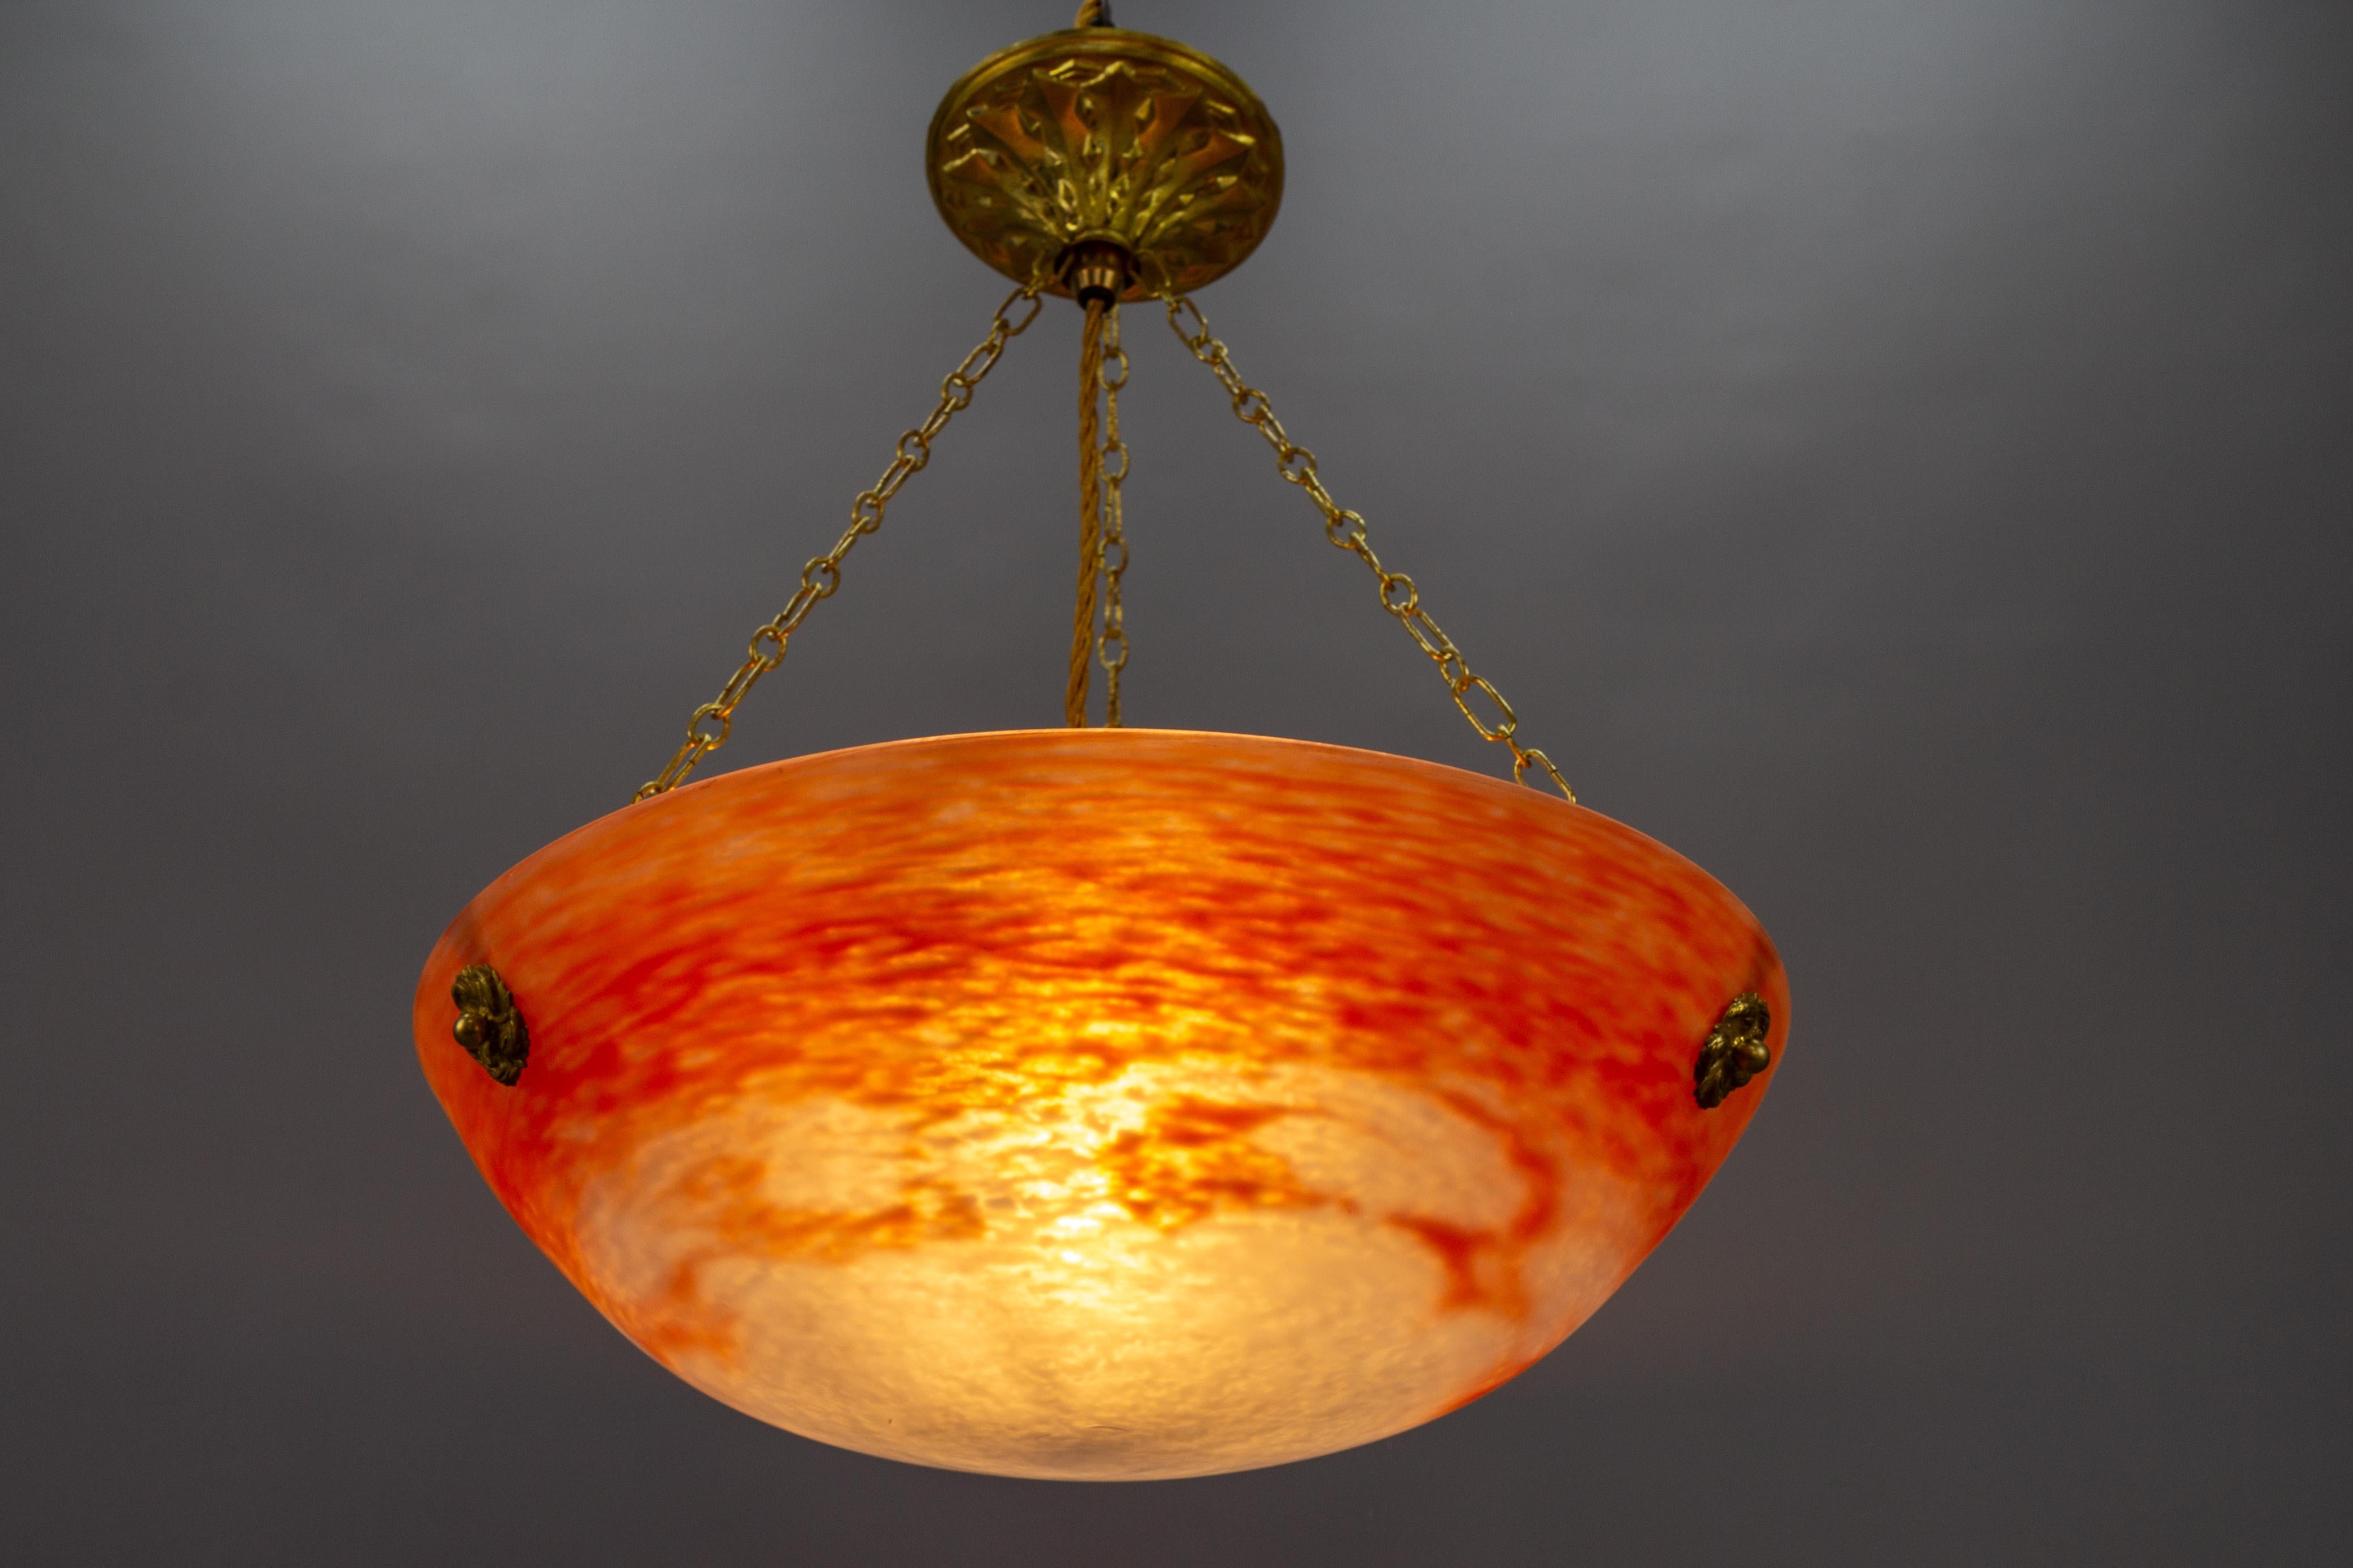 French Art Nouveau Orange and White Glass Pendant Light Signed Noverdy, 1920s For Sale 3